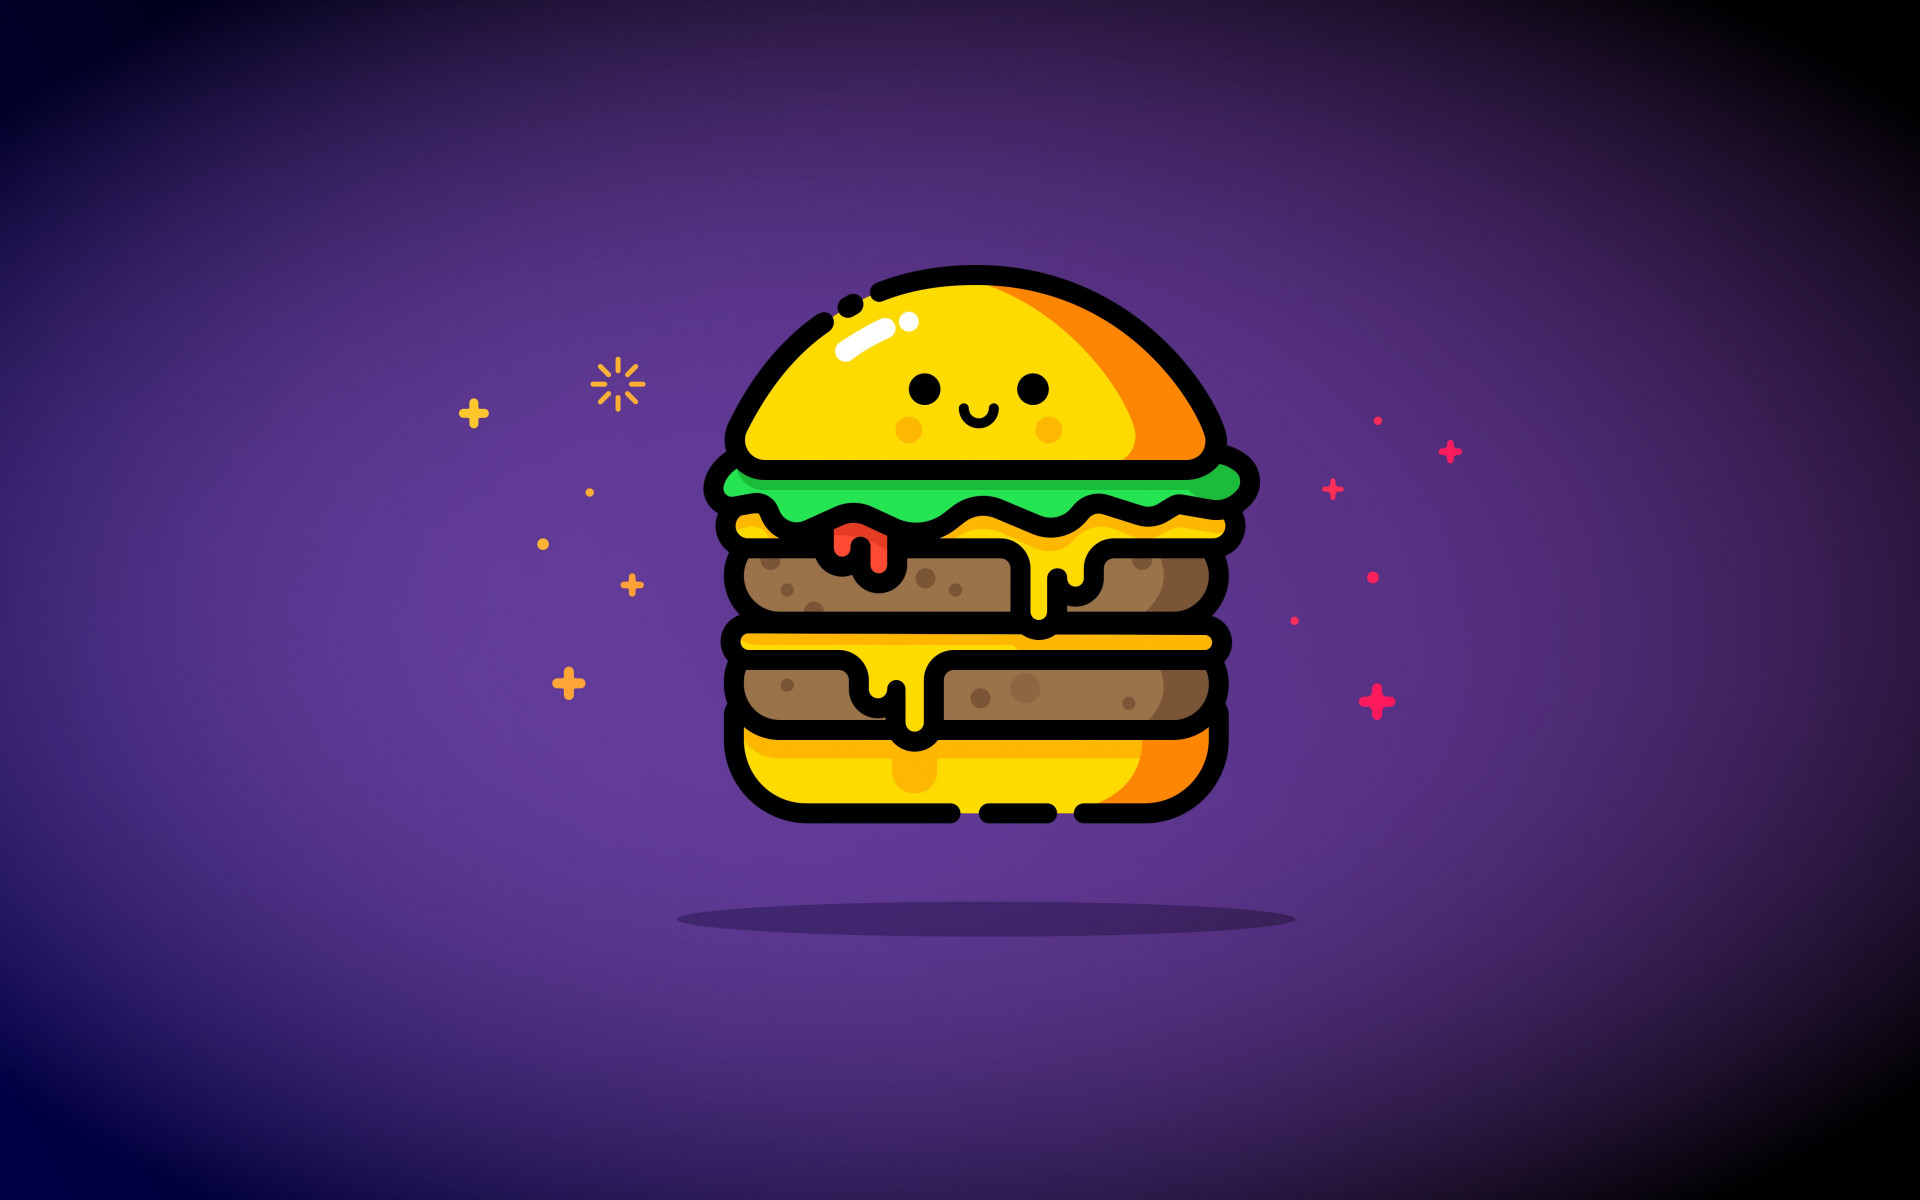 Double cheese wallpaper 1920x1200